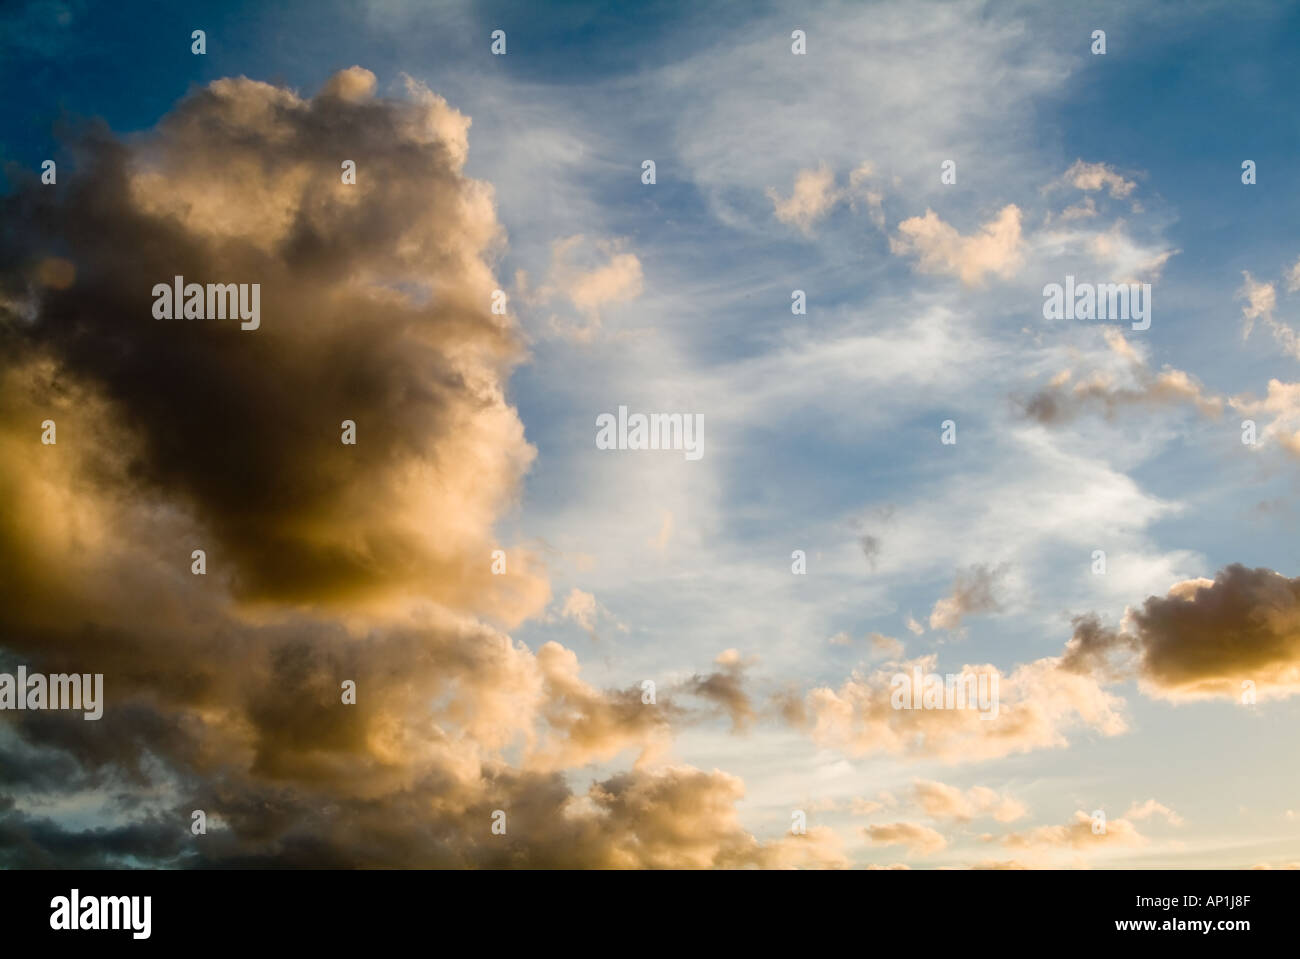 cloudscape old master style clouds late afternoon sky Stock Photo